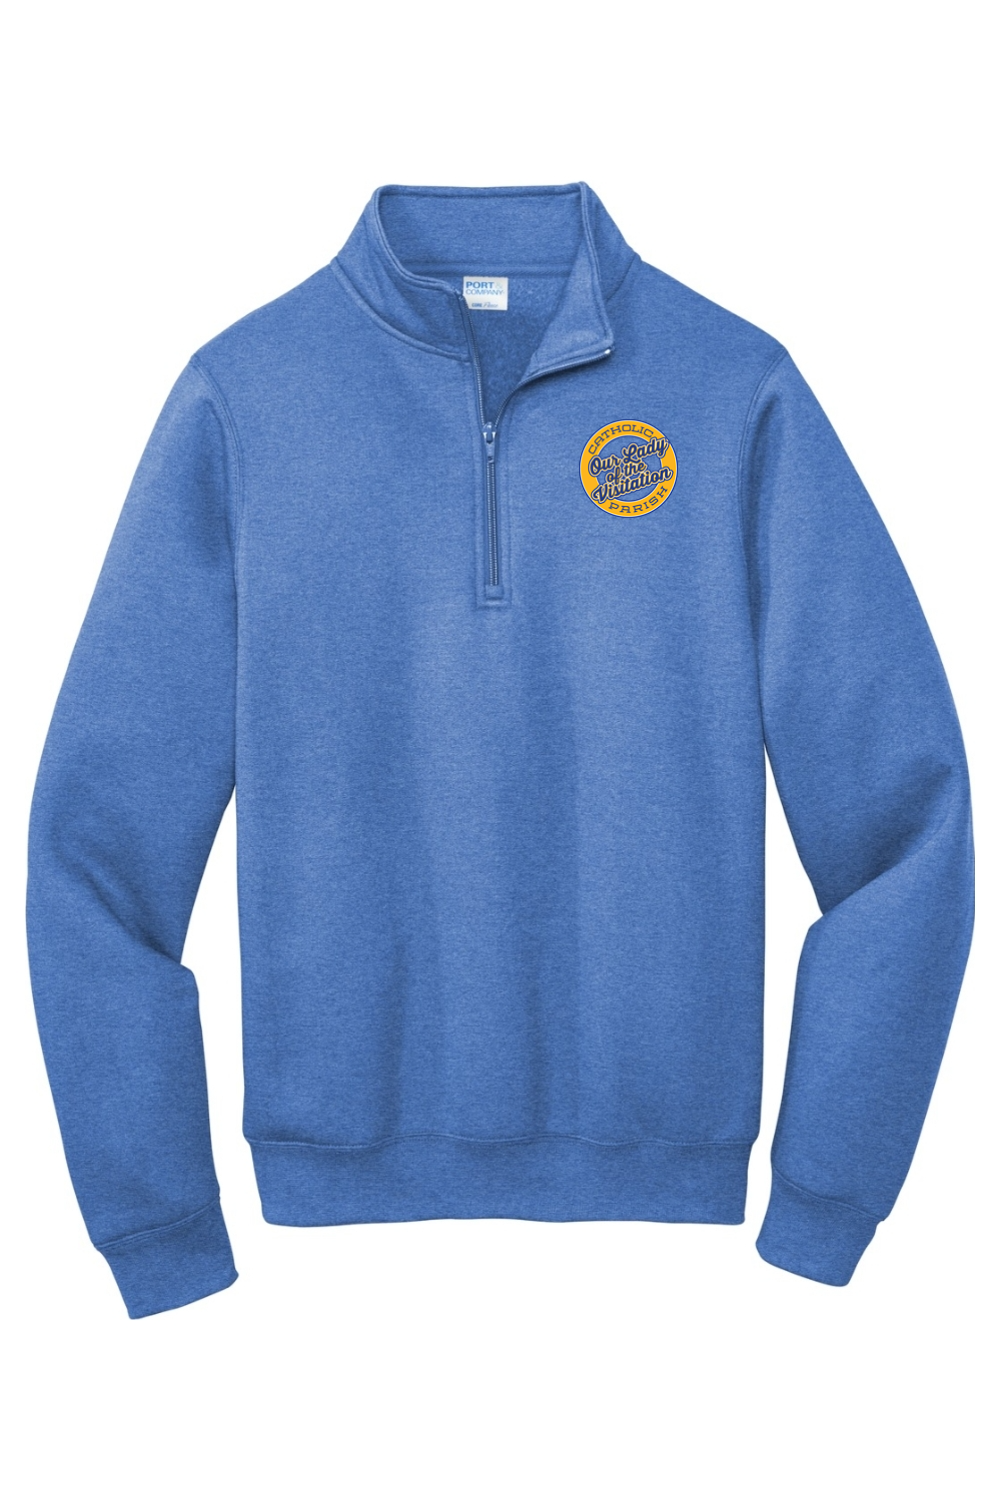 Our Lady of the Visitation Circle Left Chest Quarter Zip